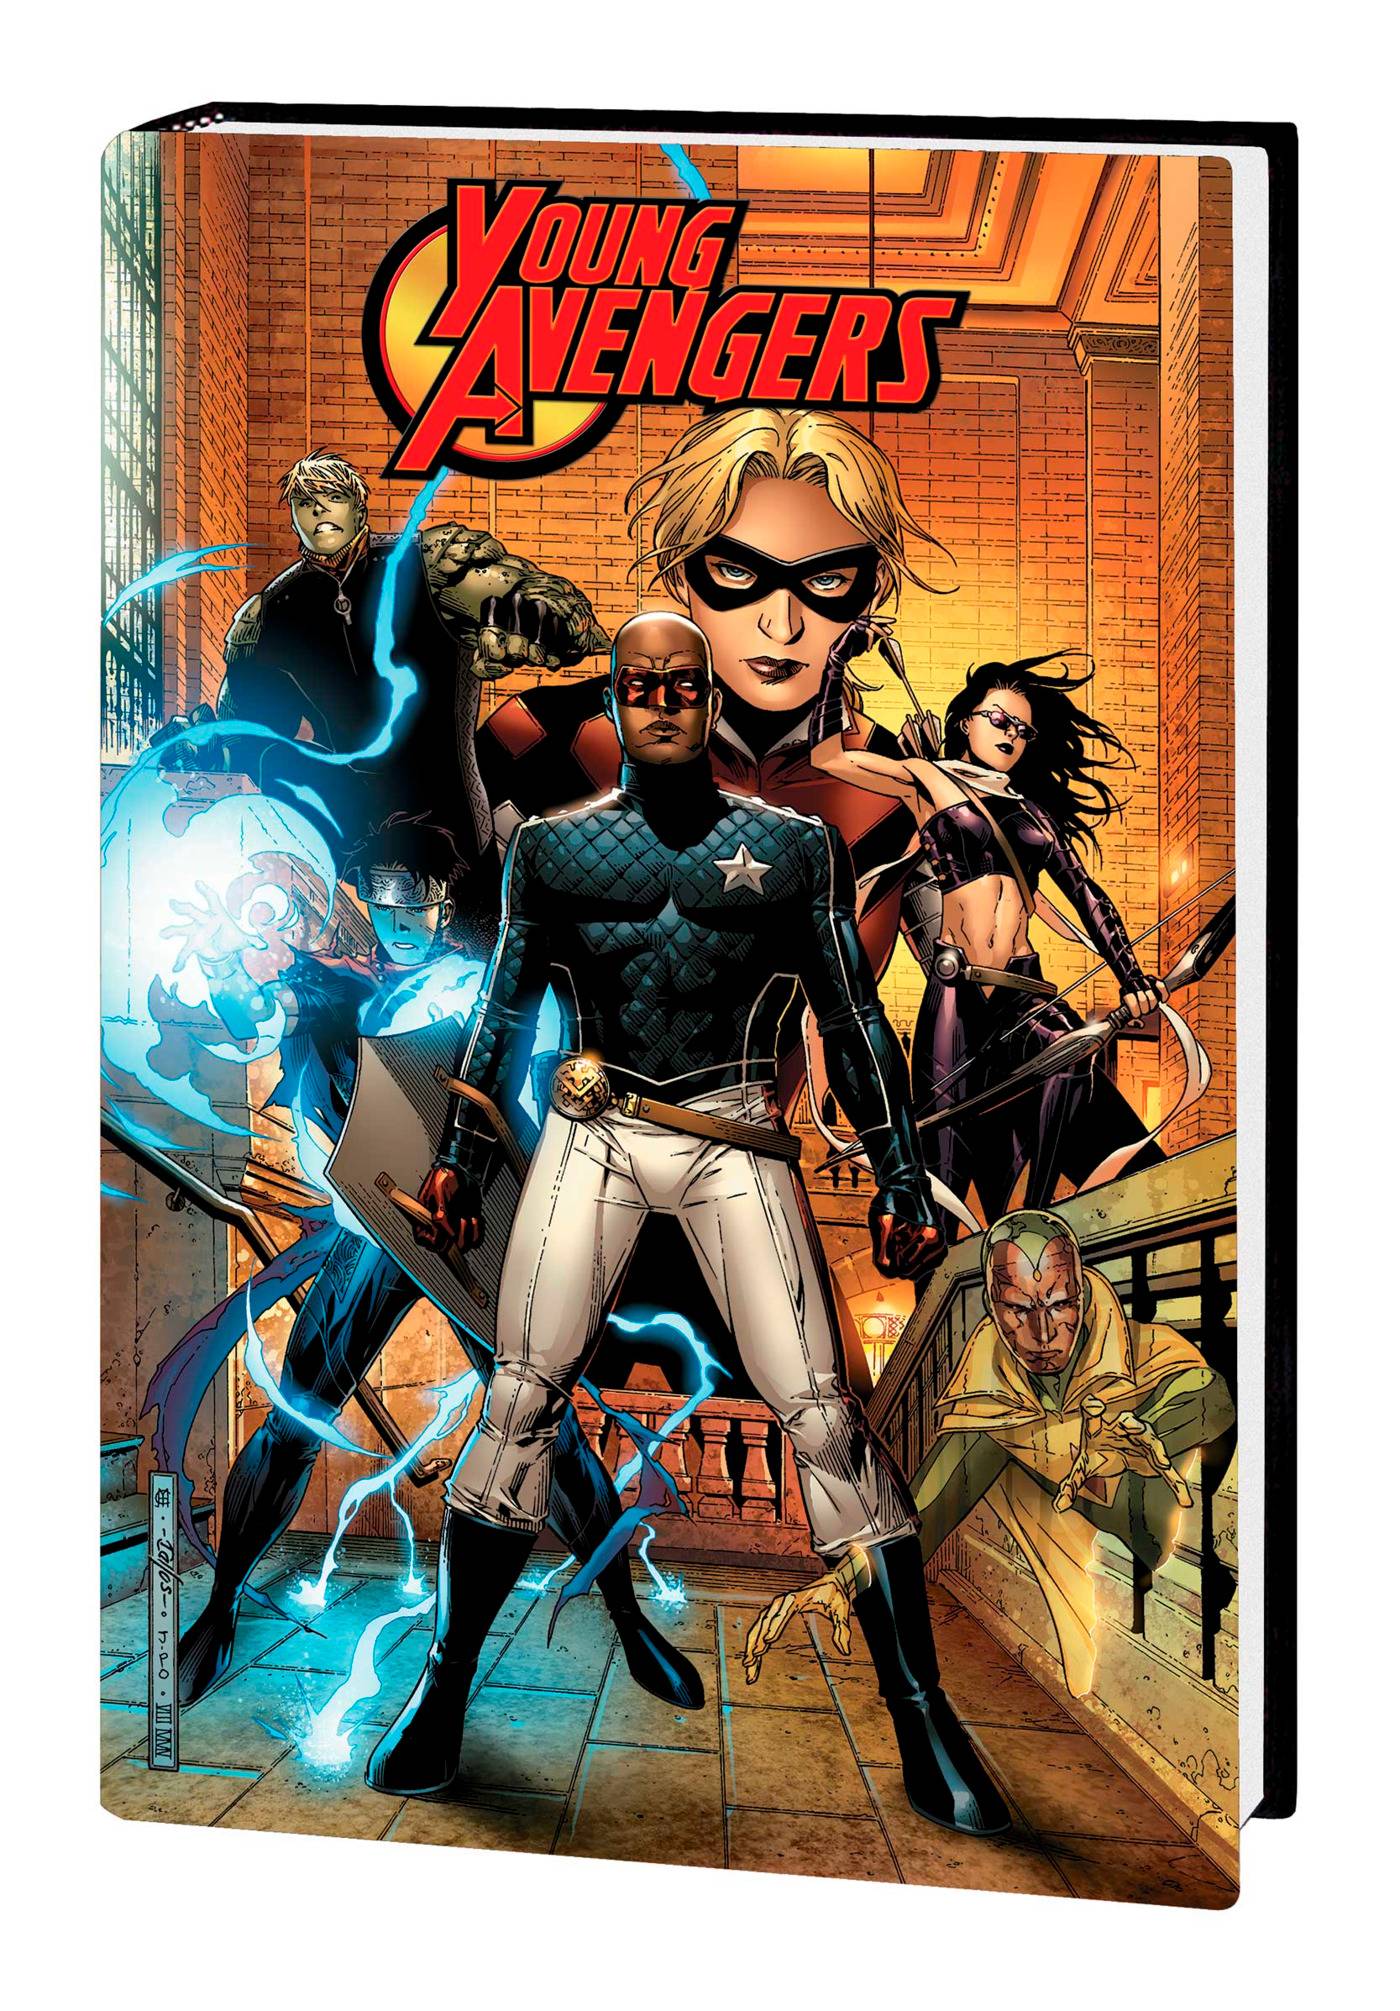 YOUNG AVENGERS BY HEINBERG AND CHEUNG OMNIBUS HC